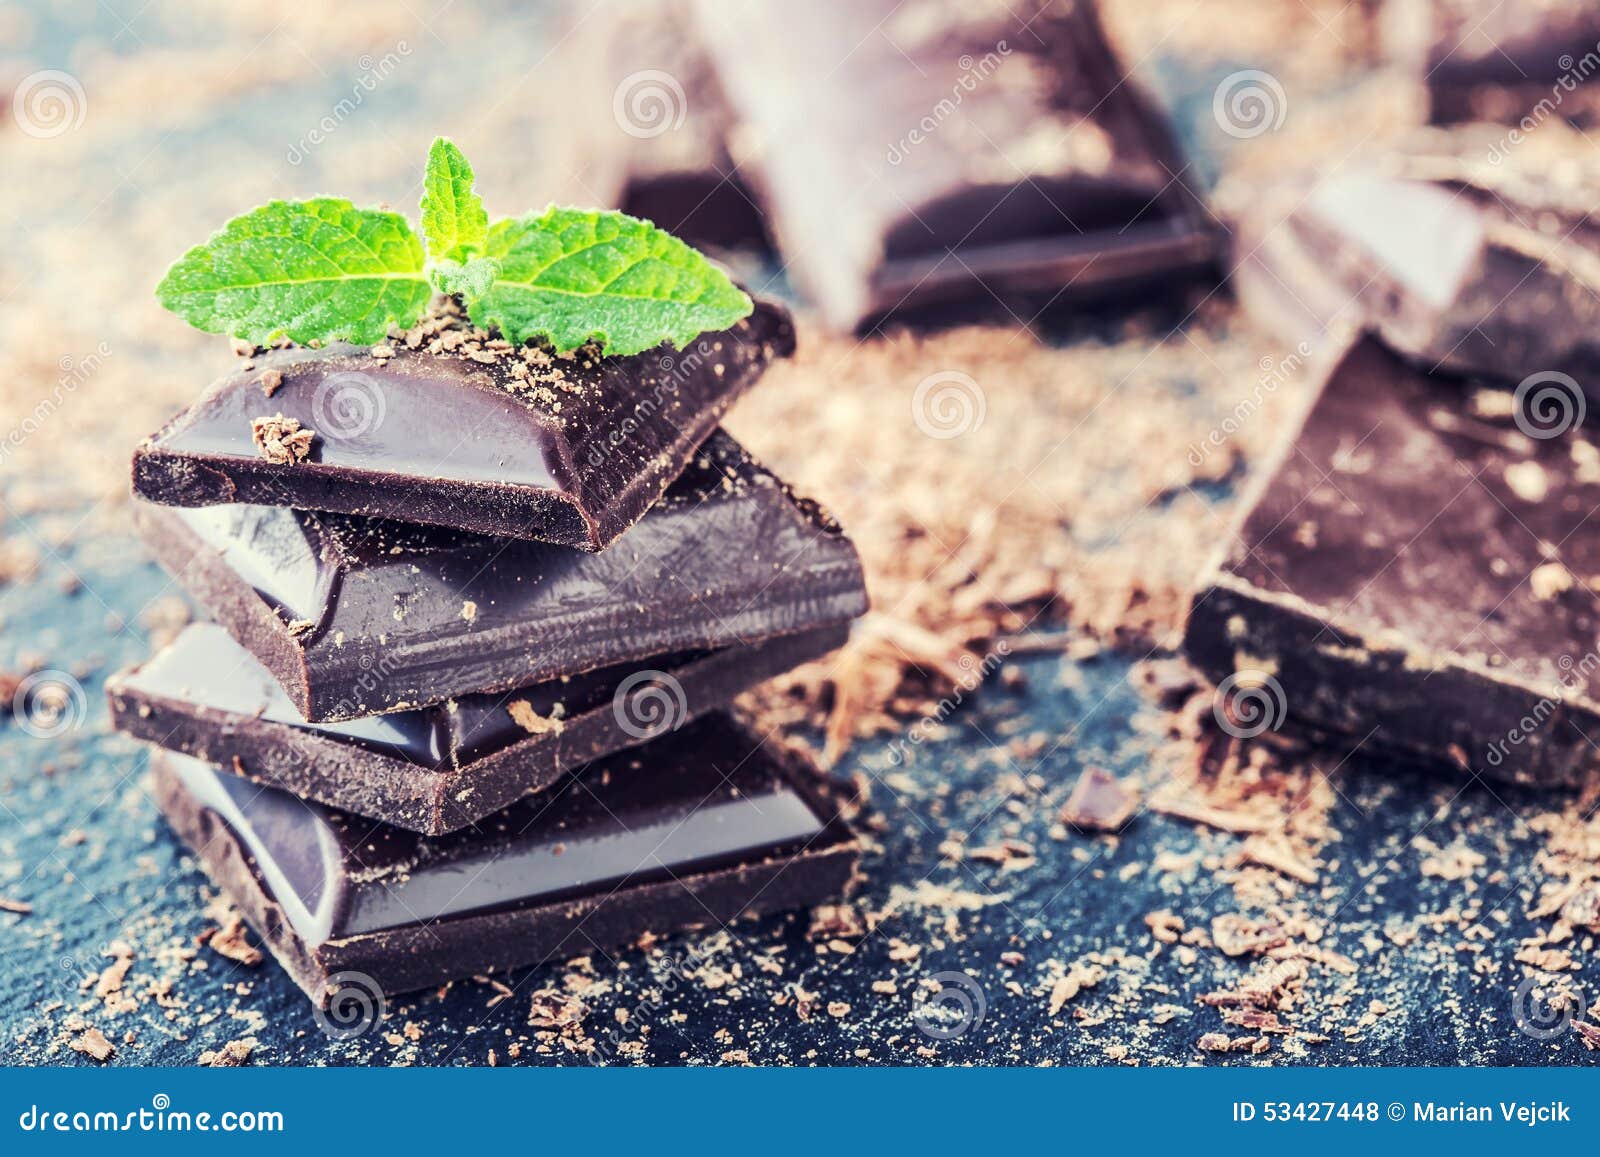 chocolate. black chocolate. a few cubes of black chocolate with mint leaves.